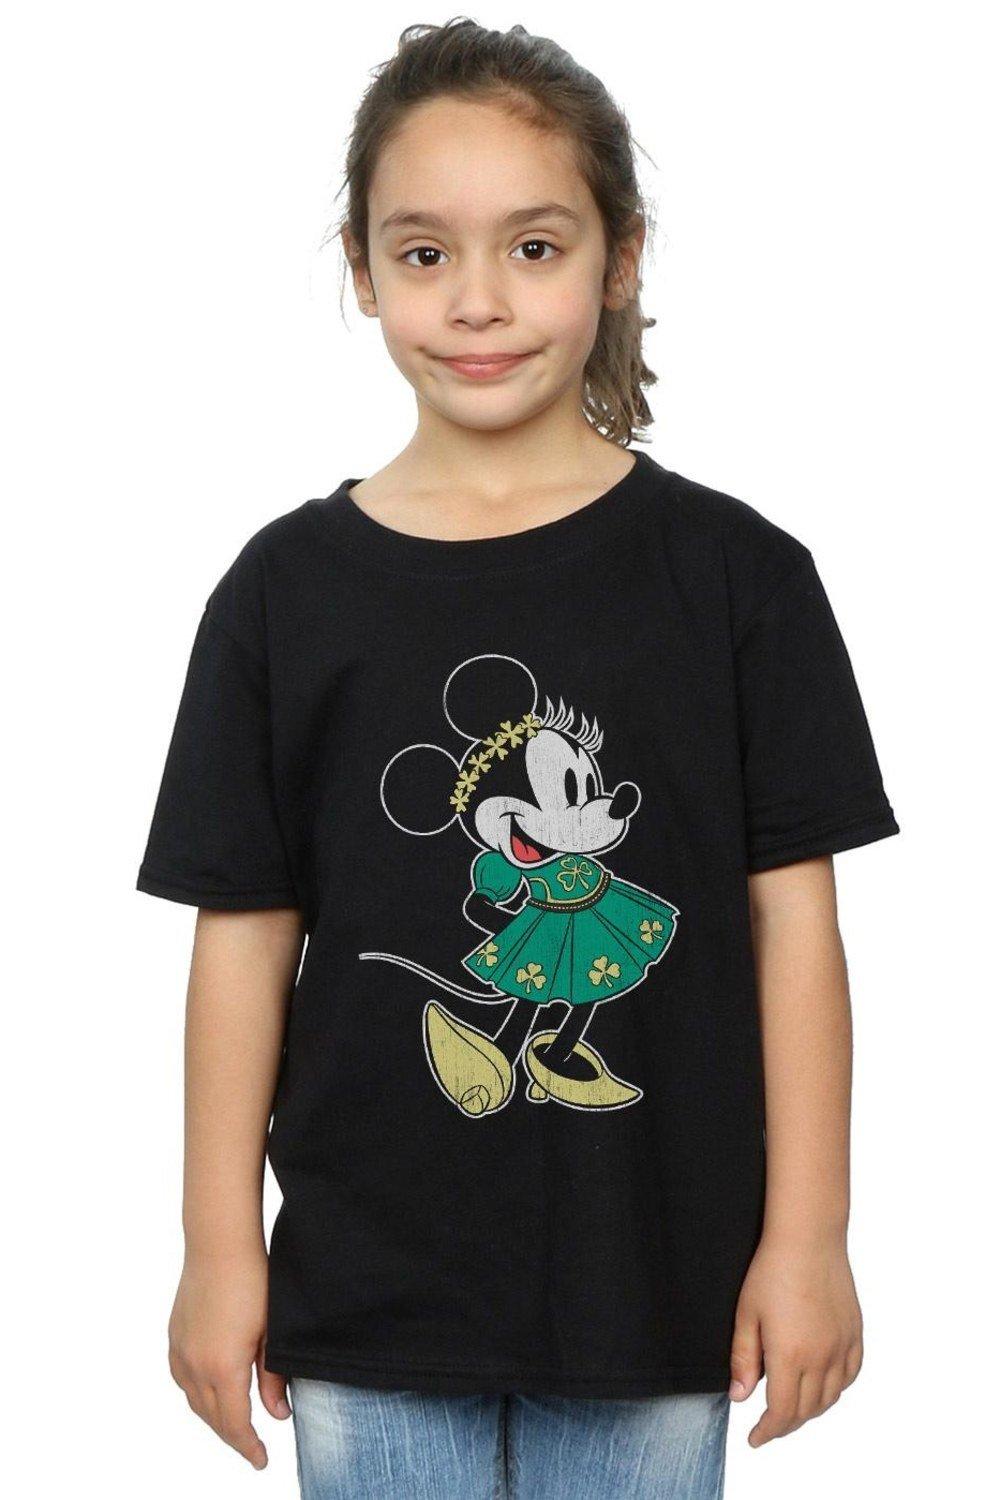 Minnie Mouse St Patrick’s Day Costume Cotton T-Shirt